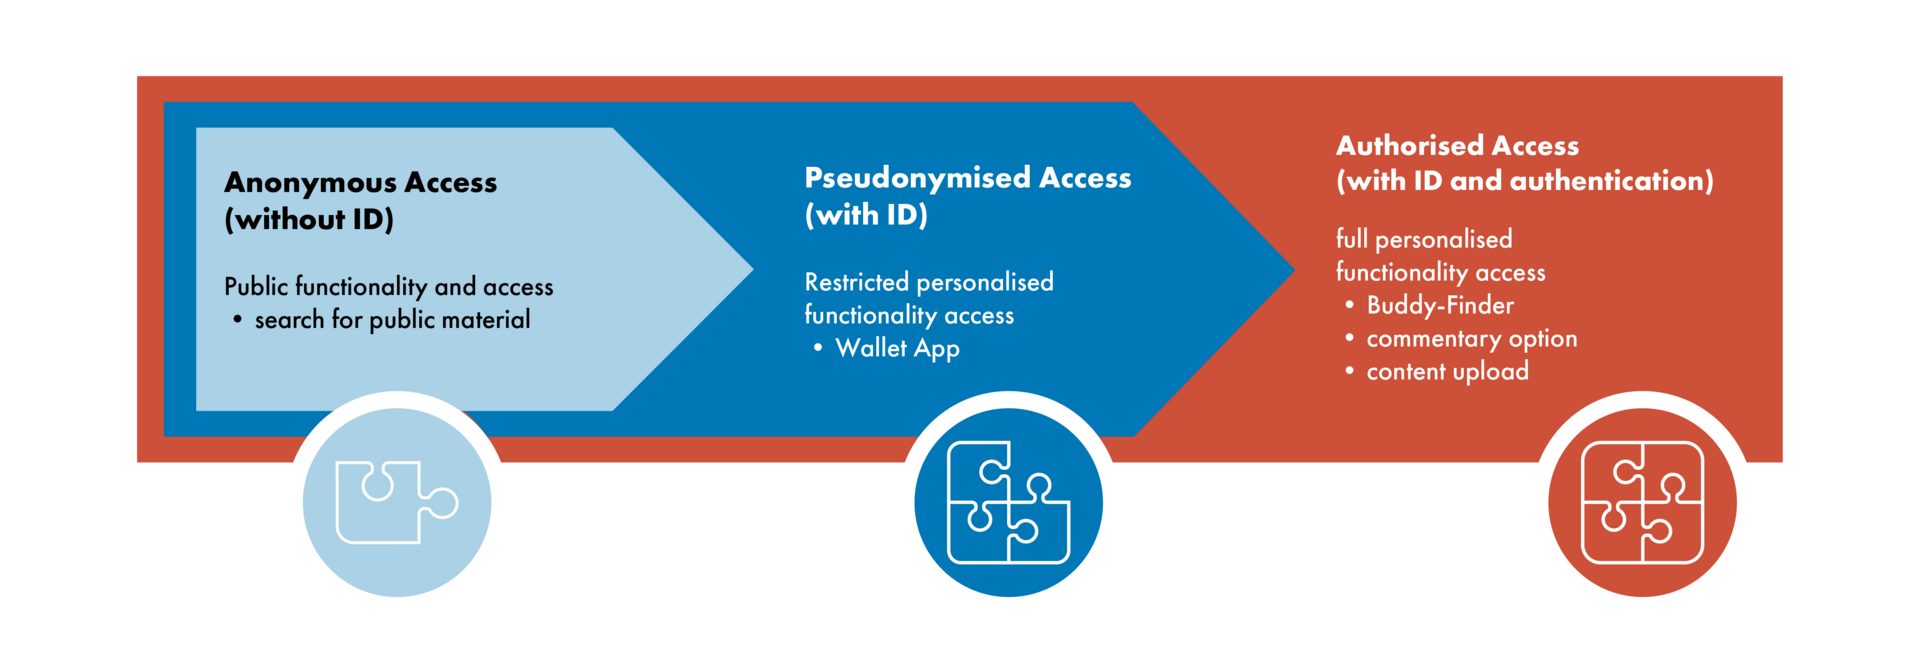 The graphic illustrates different types of access to the network infrastructure.